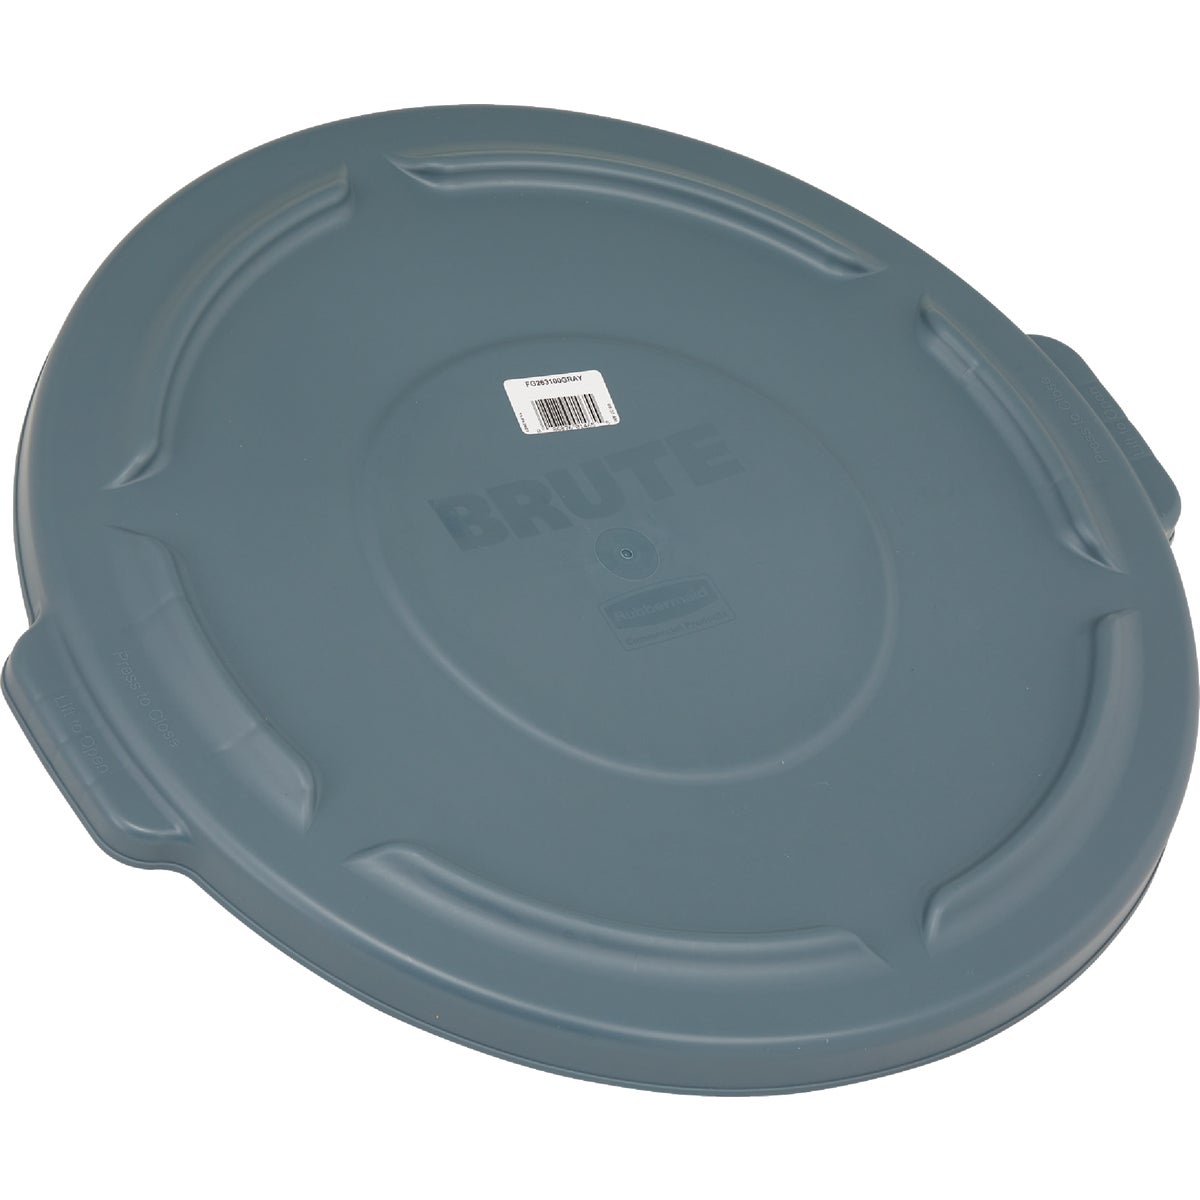 Rubbermaid Commercial Brute Gray Trash Can Lid for 44 Gal. Trash Can